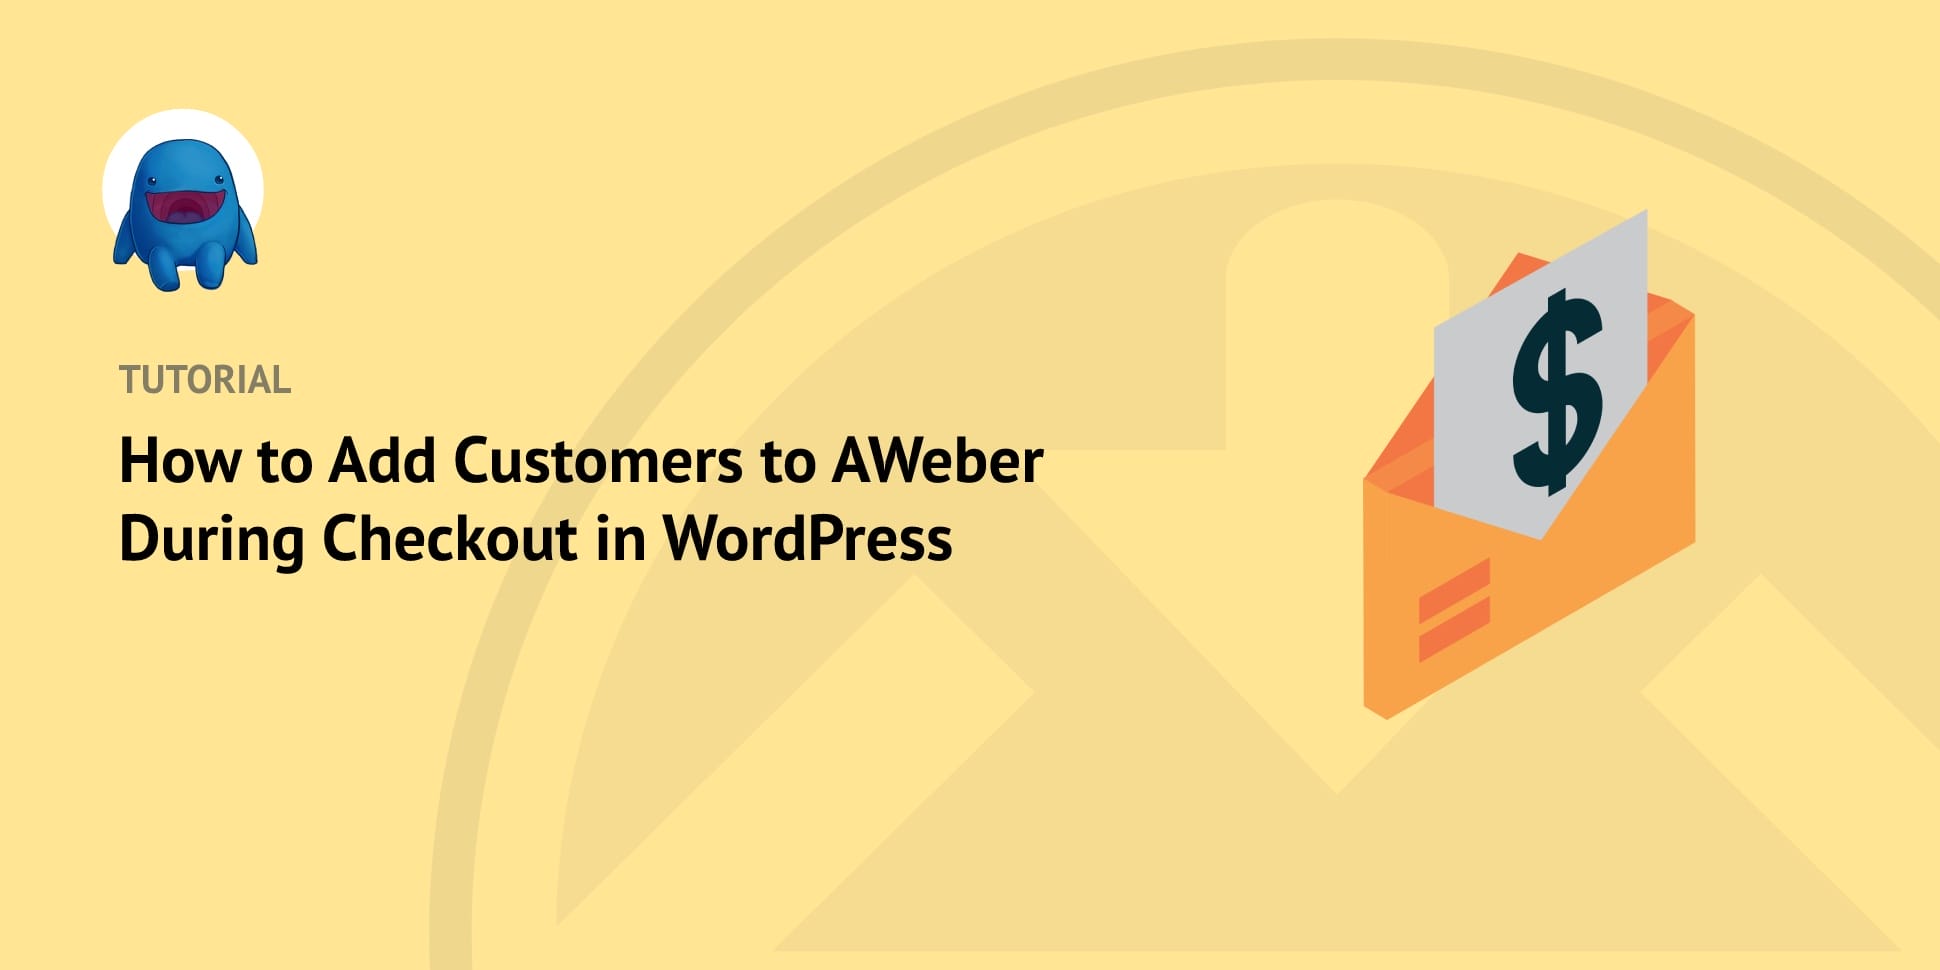 How to Add Customers to AWeber During Checkout in WordPress